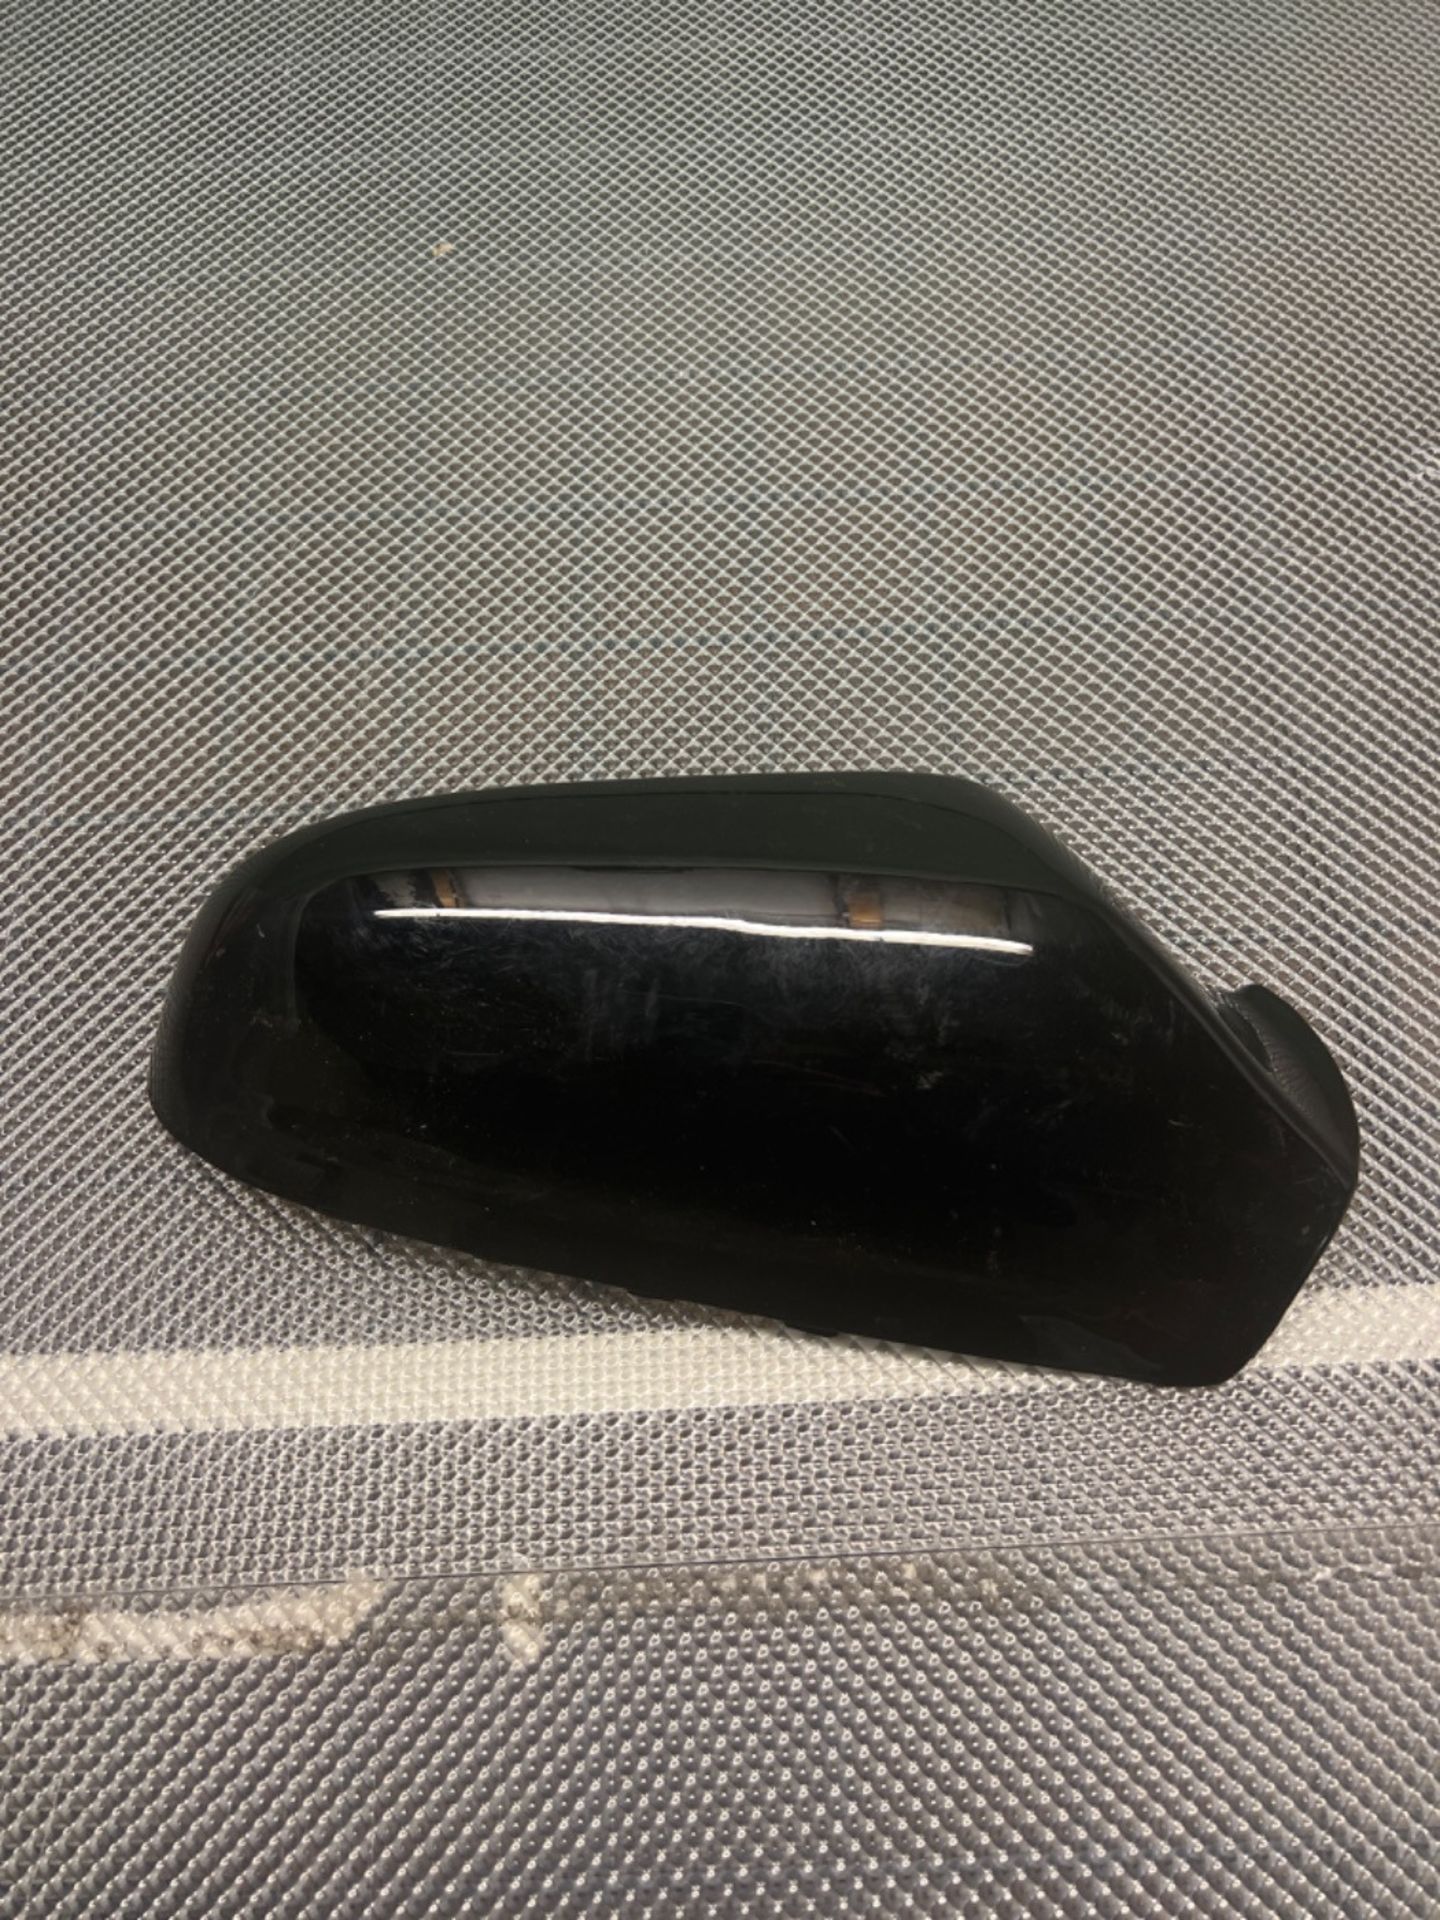 Wing Mirror Cover In Black Sapphire UK Drivers Side UK Drivers Side - Image 3 of 3